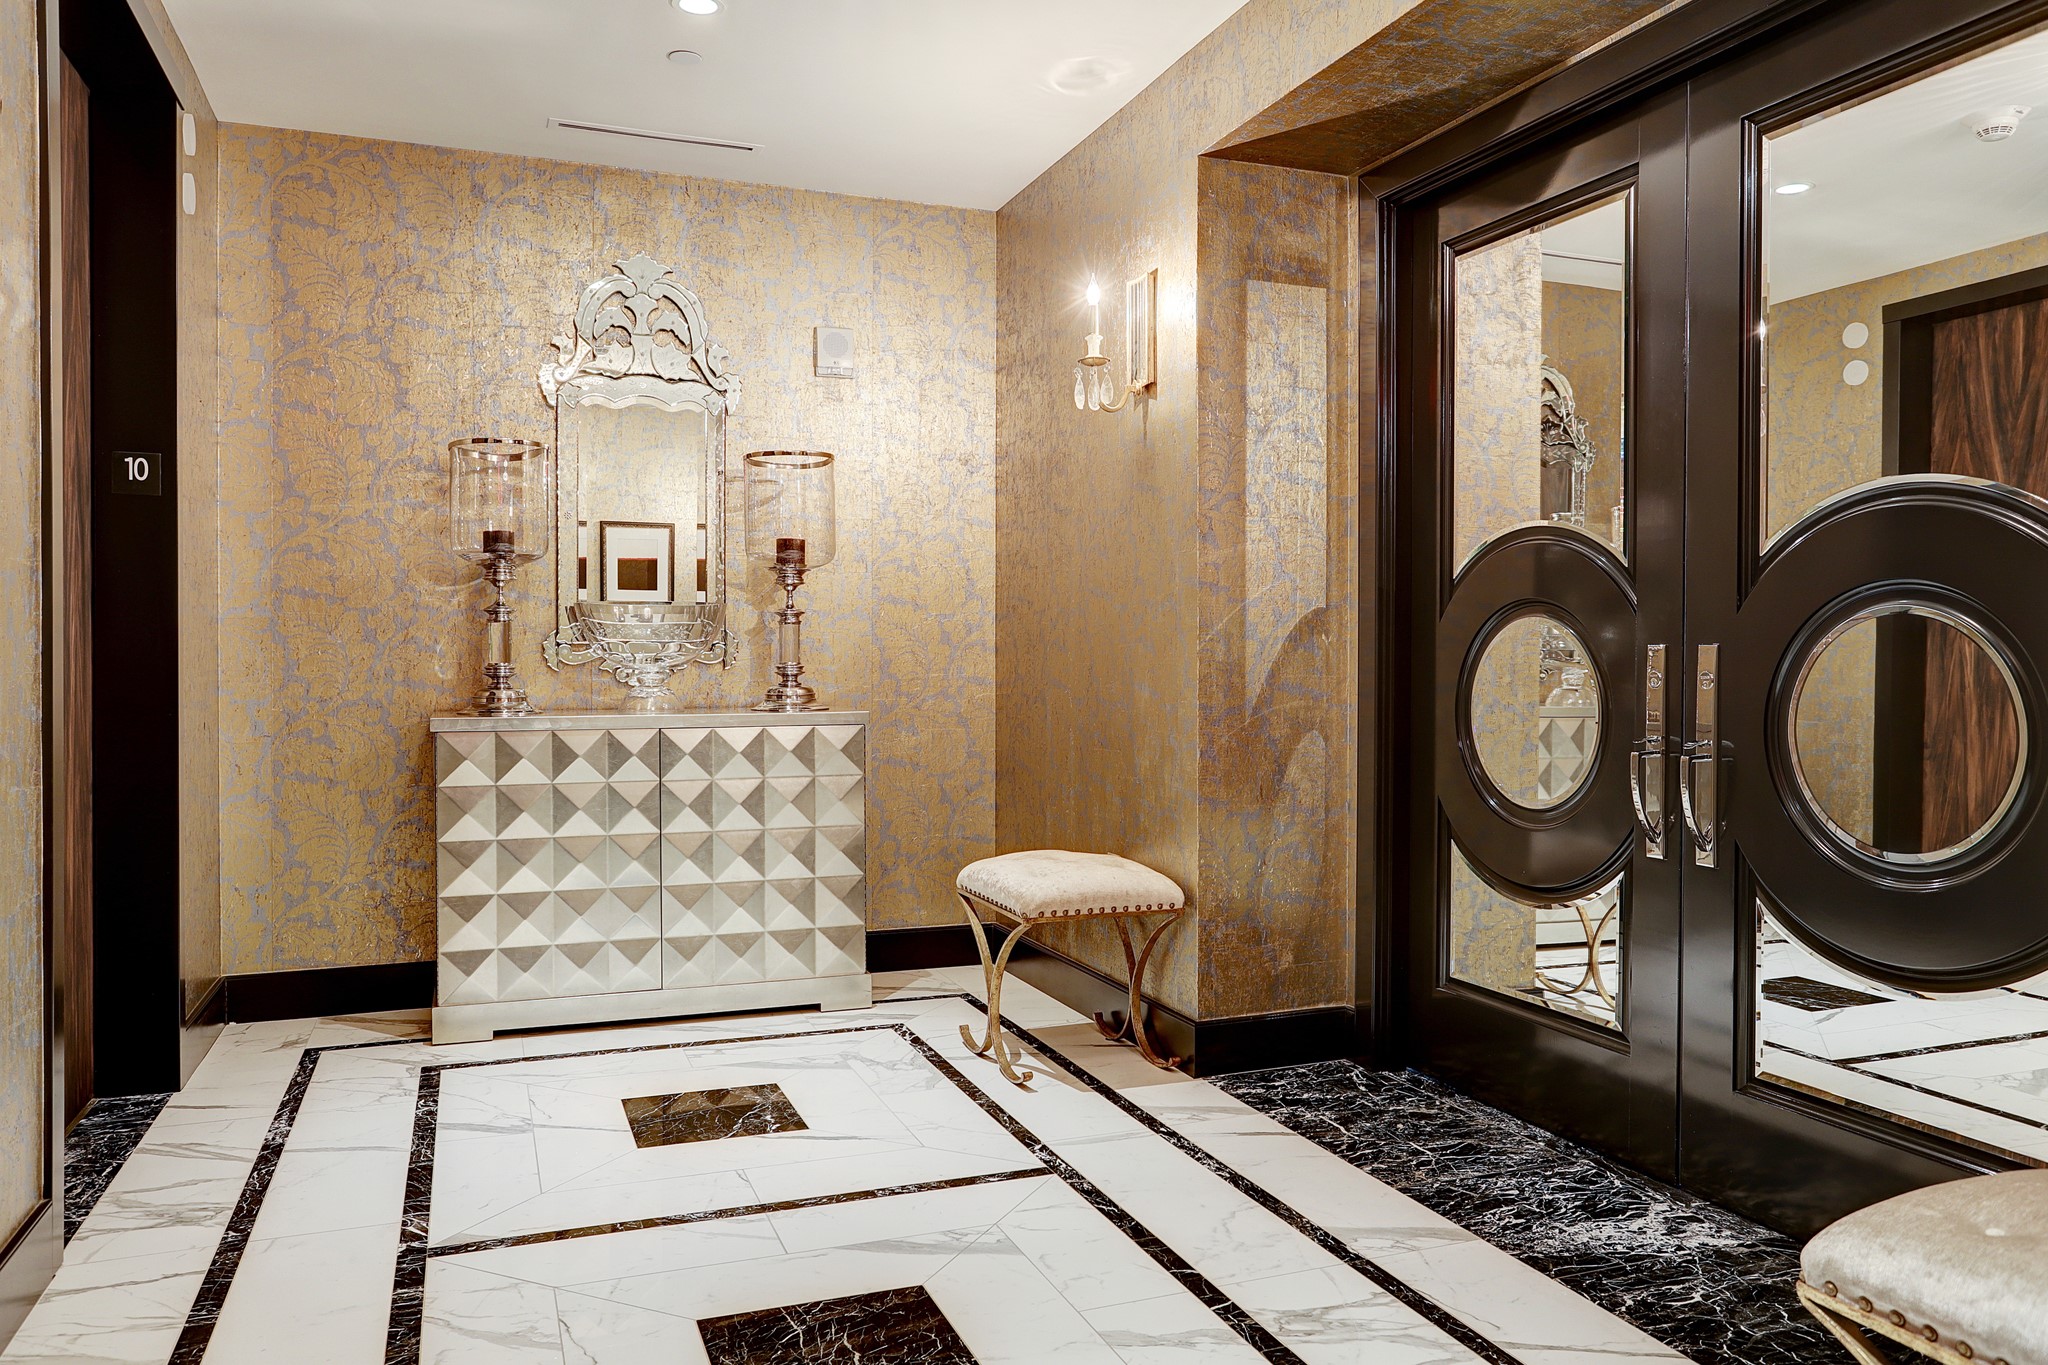 Your own private elevator lobby with custom wallpaper, porcelain tile floors with marble border and accents, and double door entry into the unit.